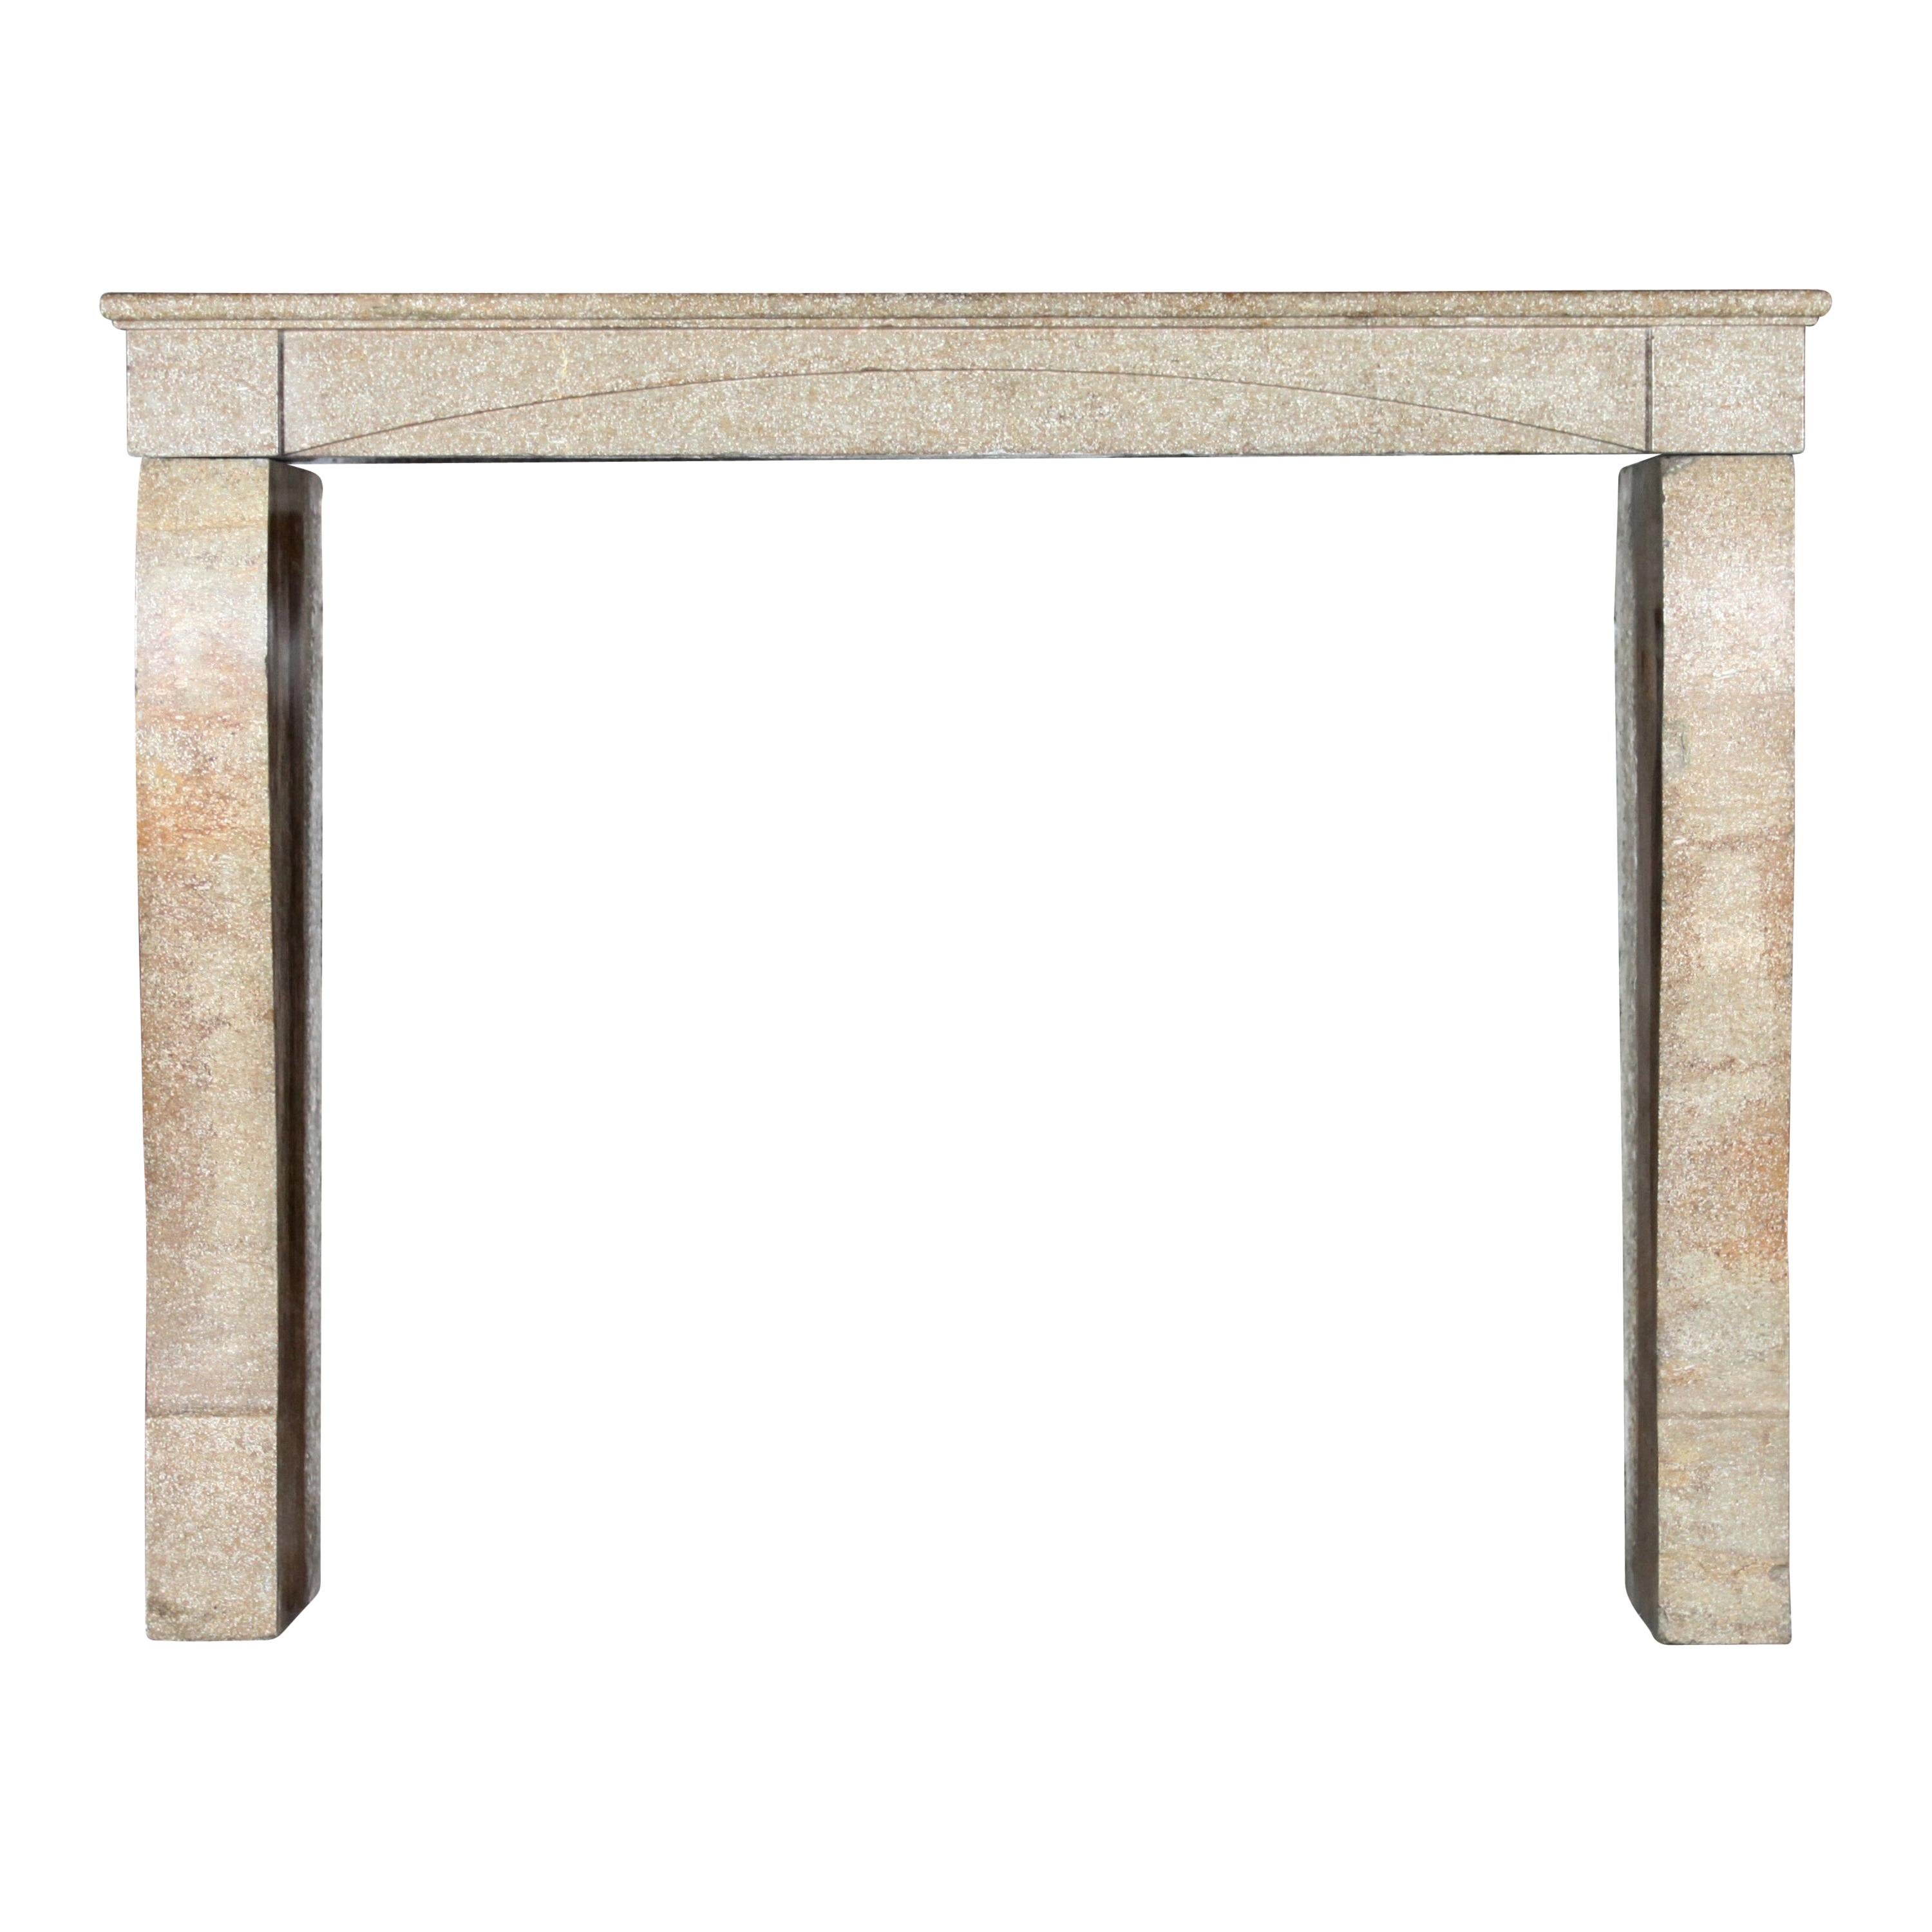 Fine French Country Limestone Vintage Fireplace Surround